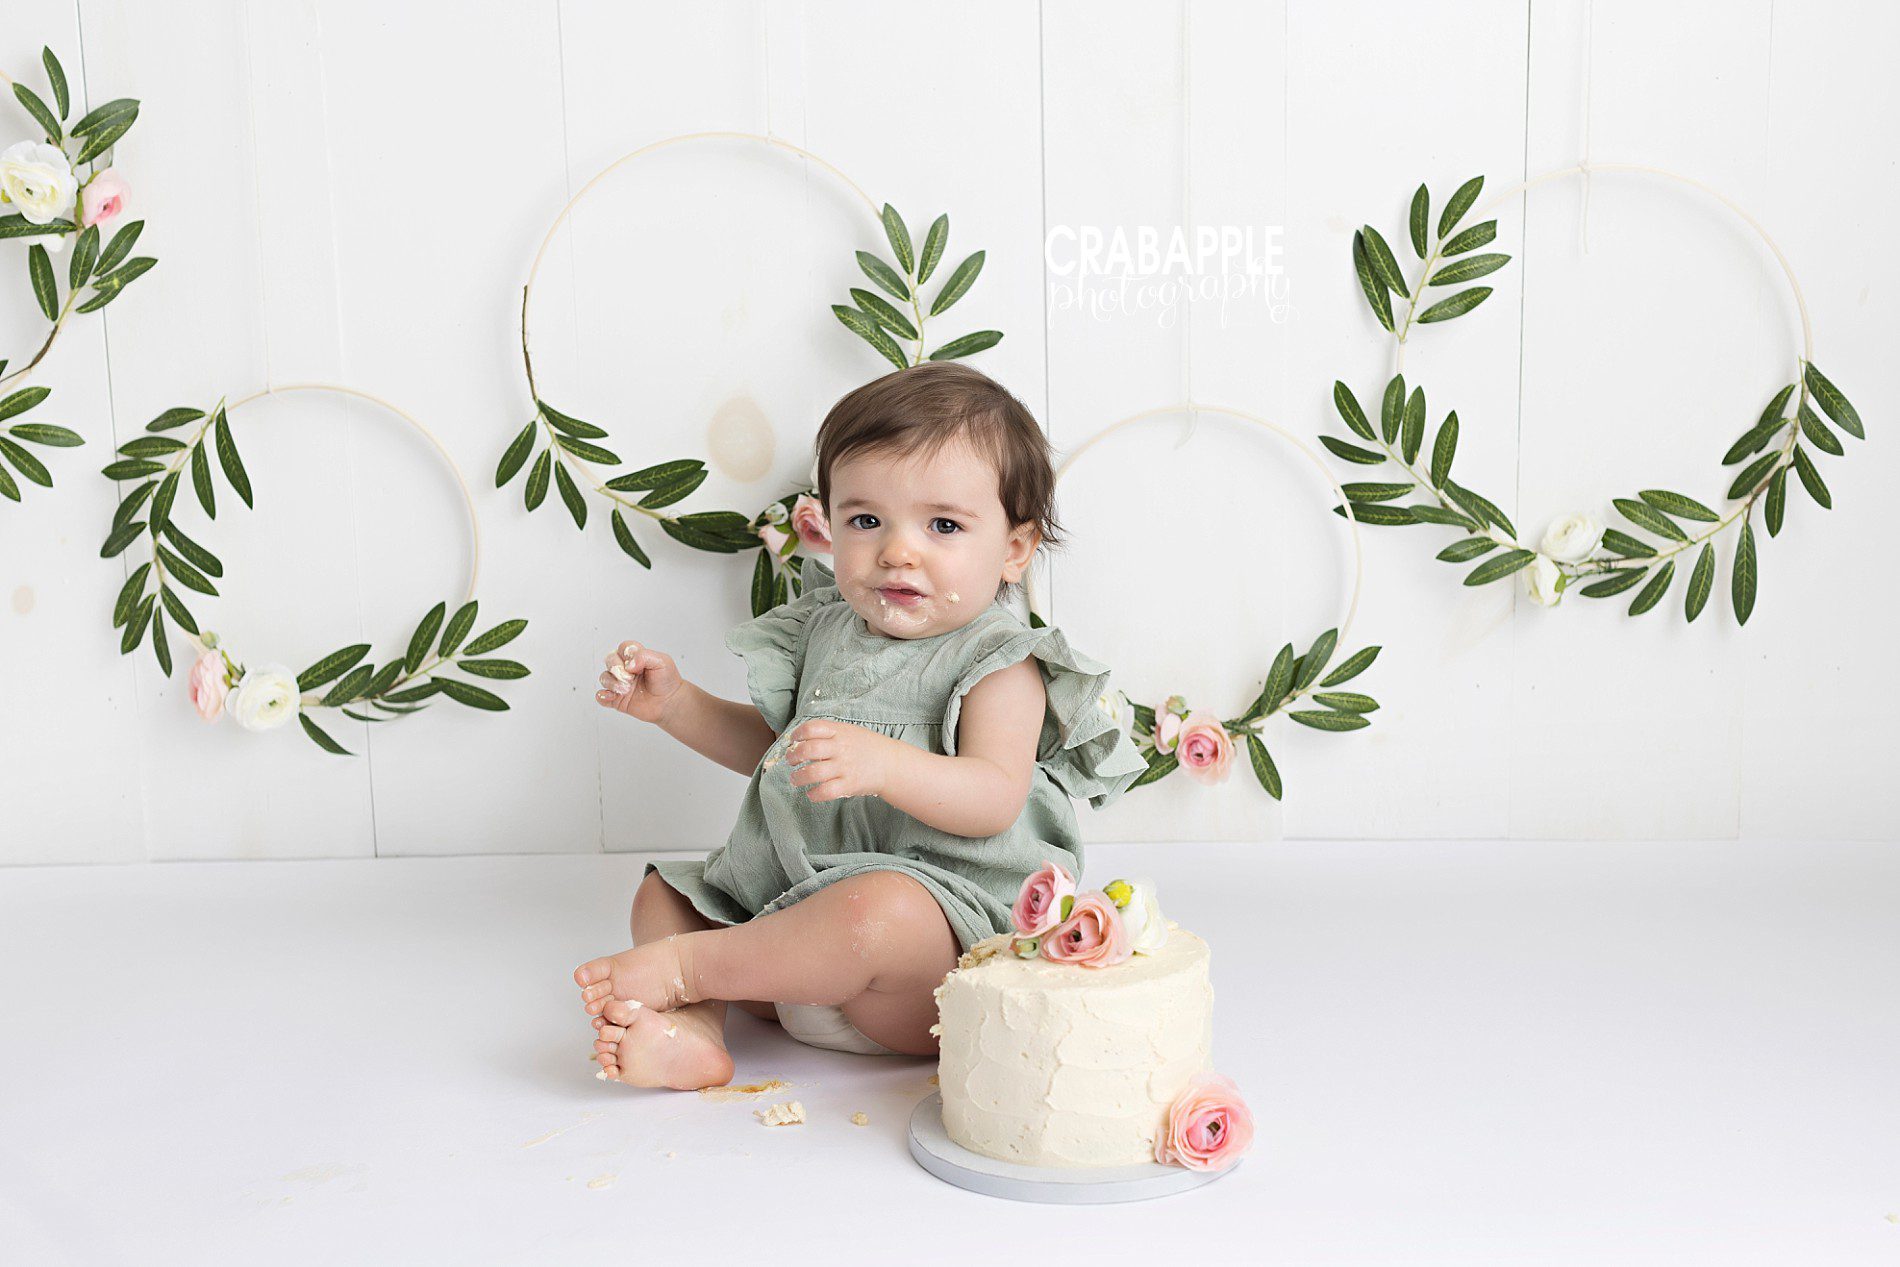 cake smash set design with faux flowers and greenery